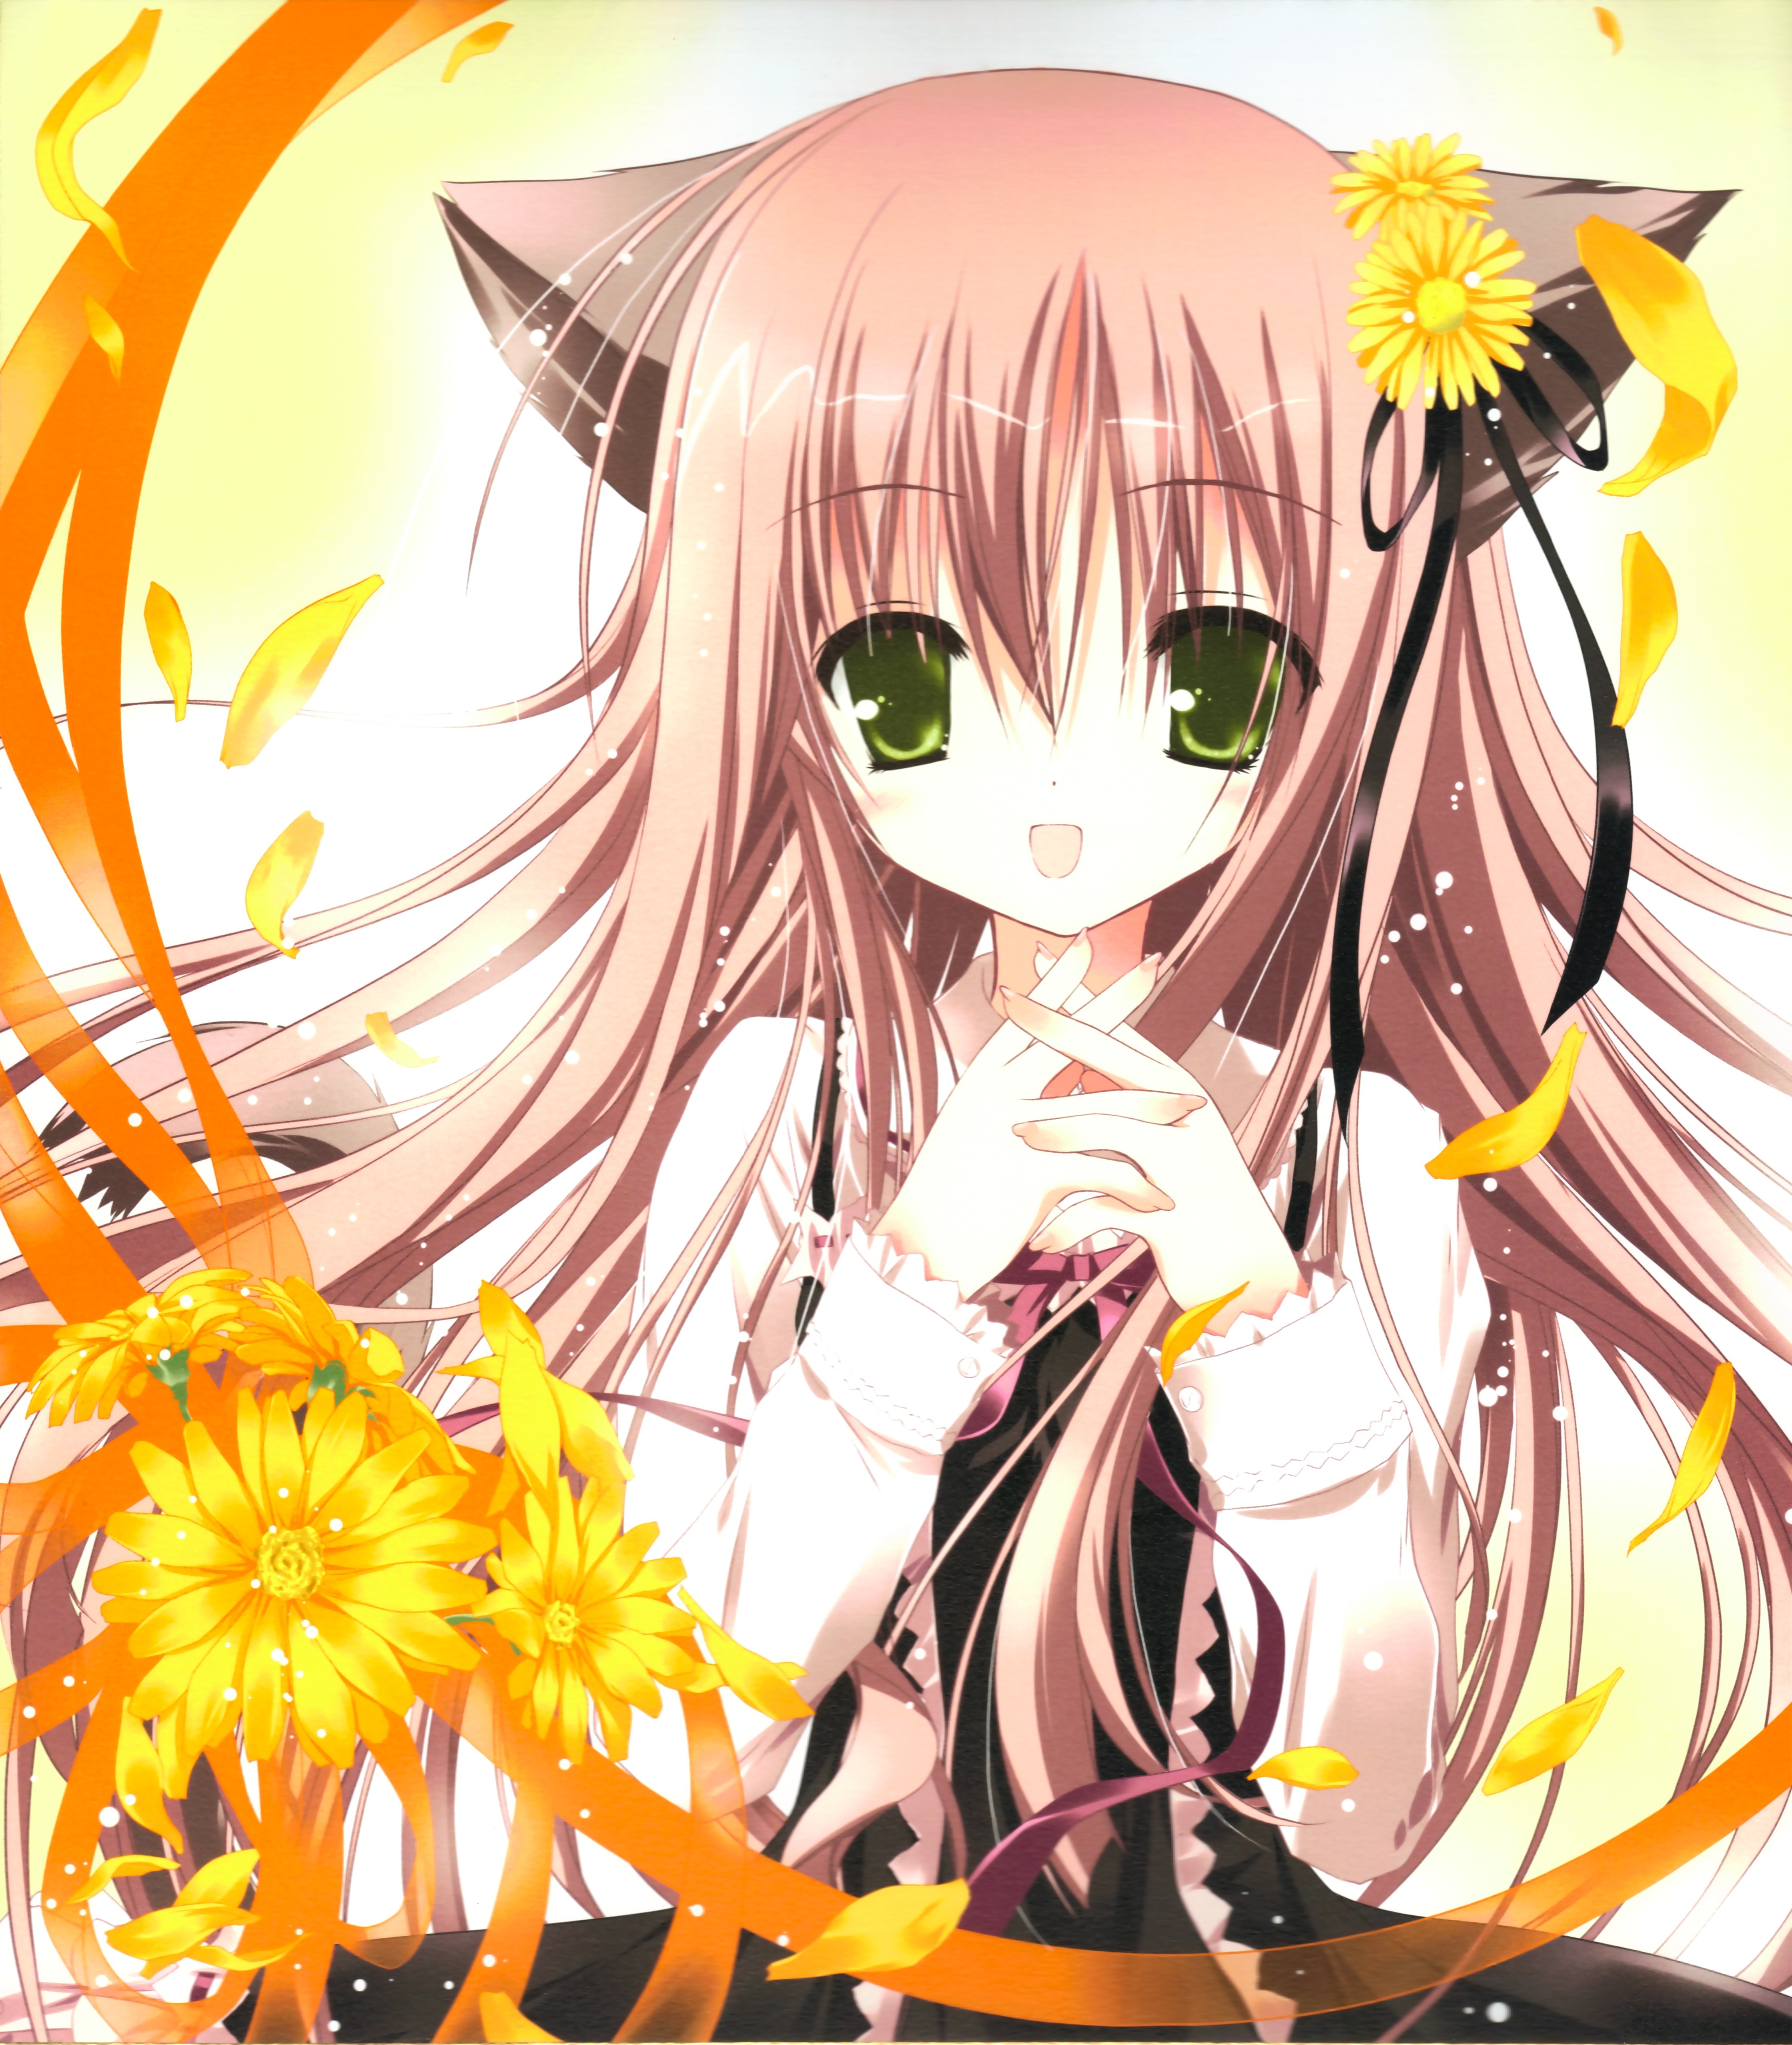 cat, Ears, Lolicon, Tinkerbell, Lolita, Fashion, Tinkle, Illustrations, Anime, Girls Wallpaper